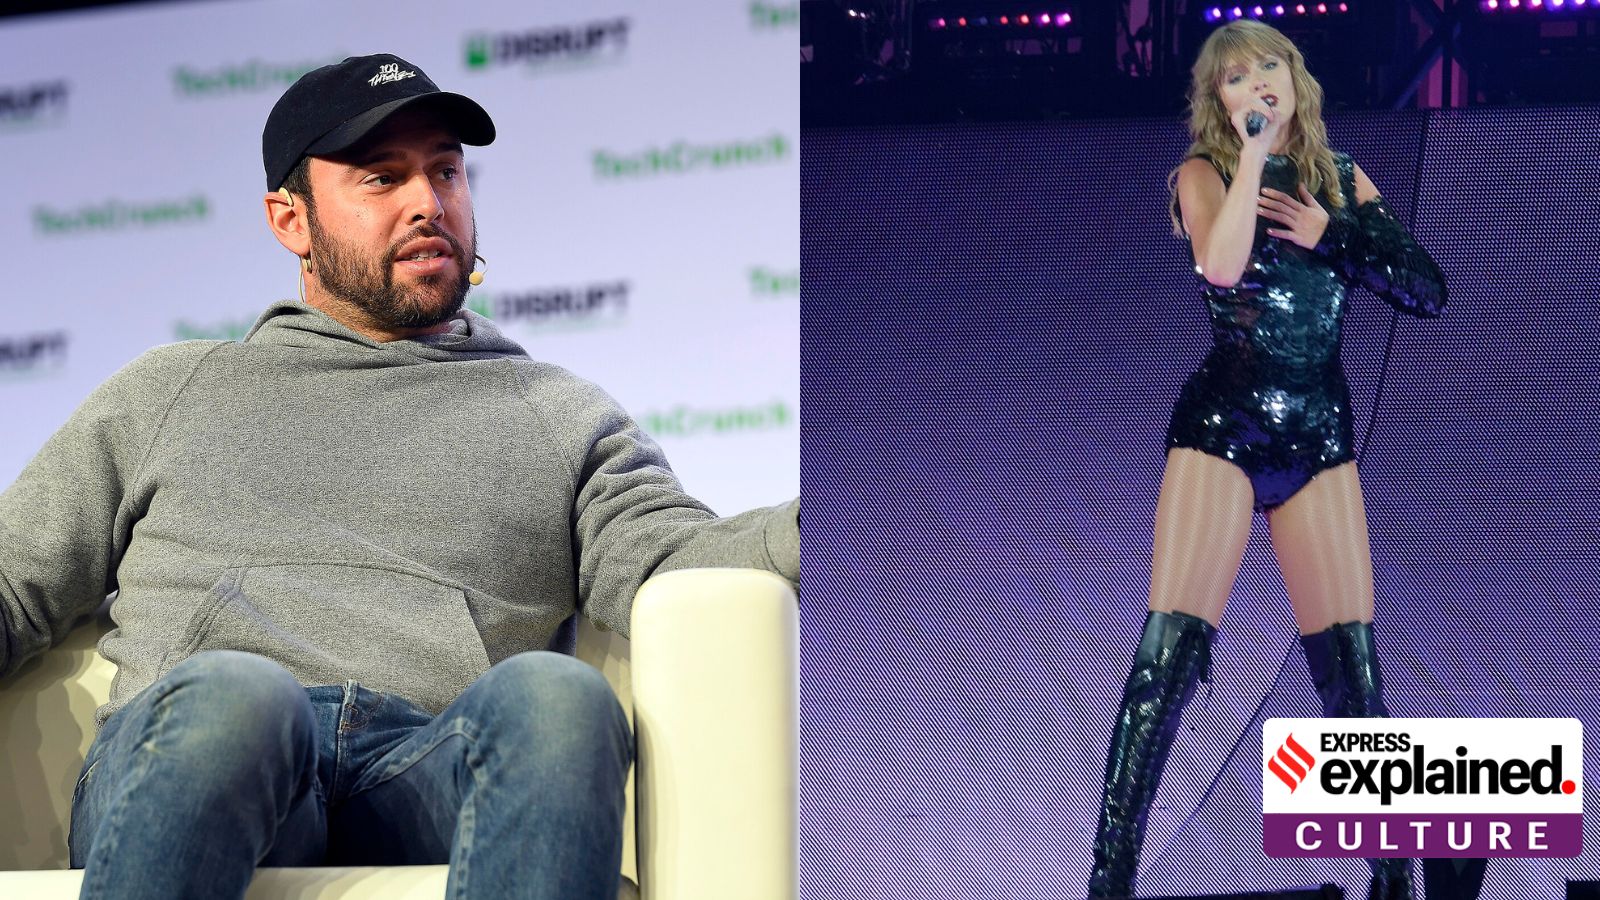 “Scooter” Braun gives up music management: His dispute with Taylor Swift flares up again | Explained News